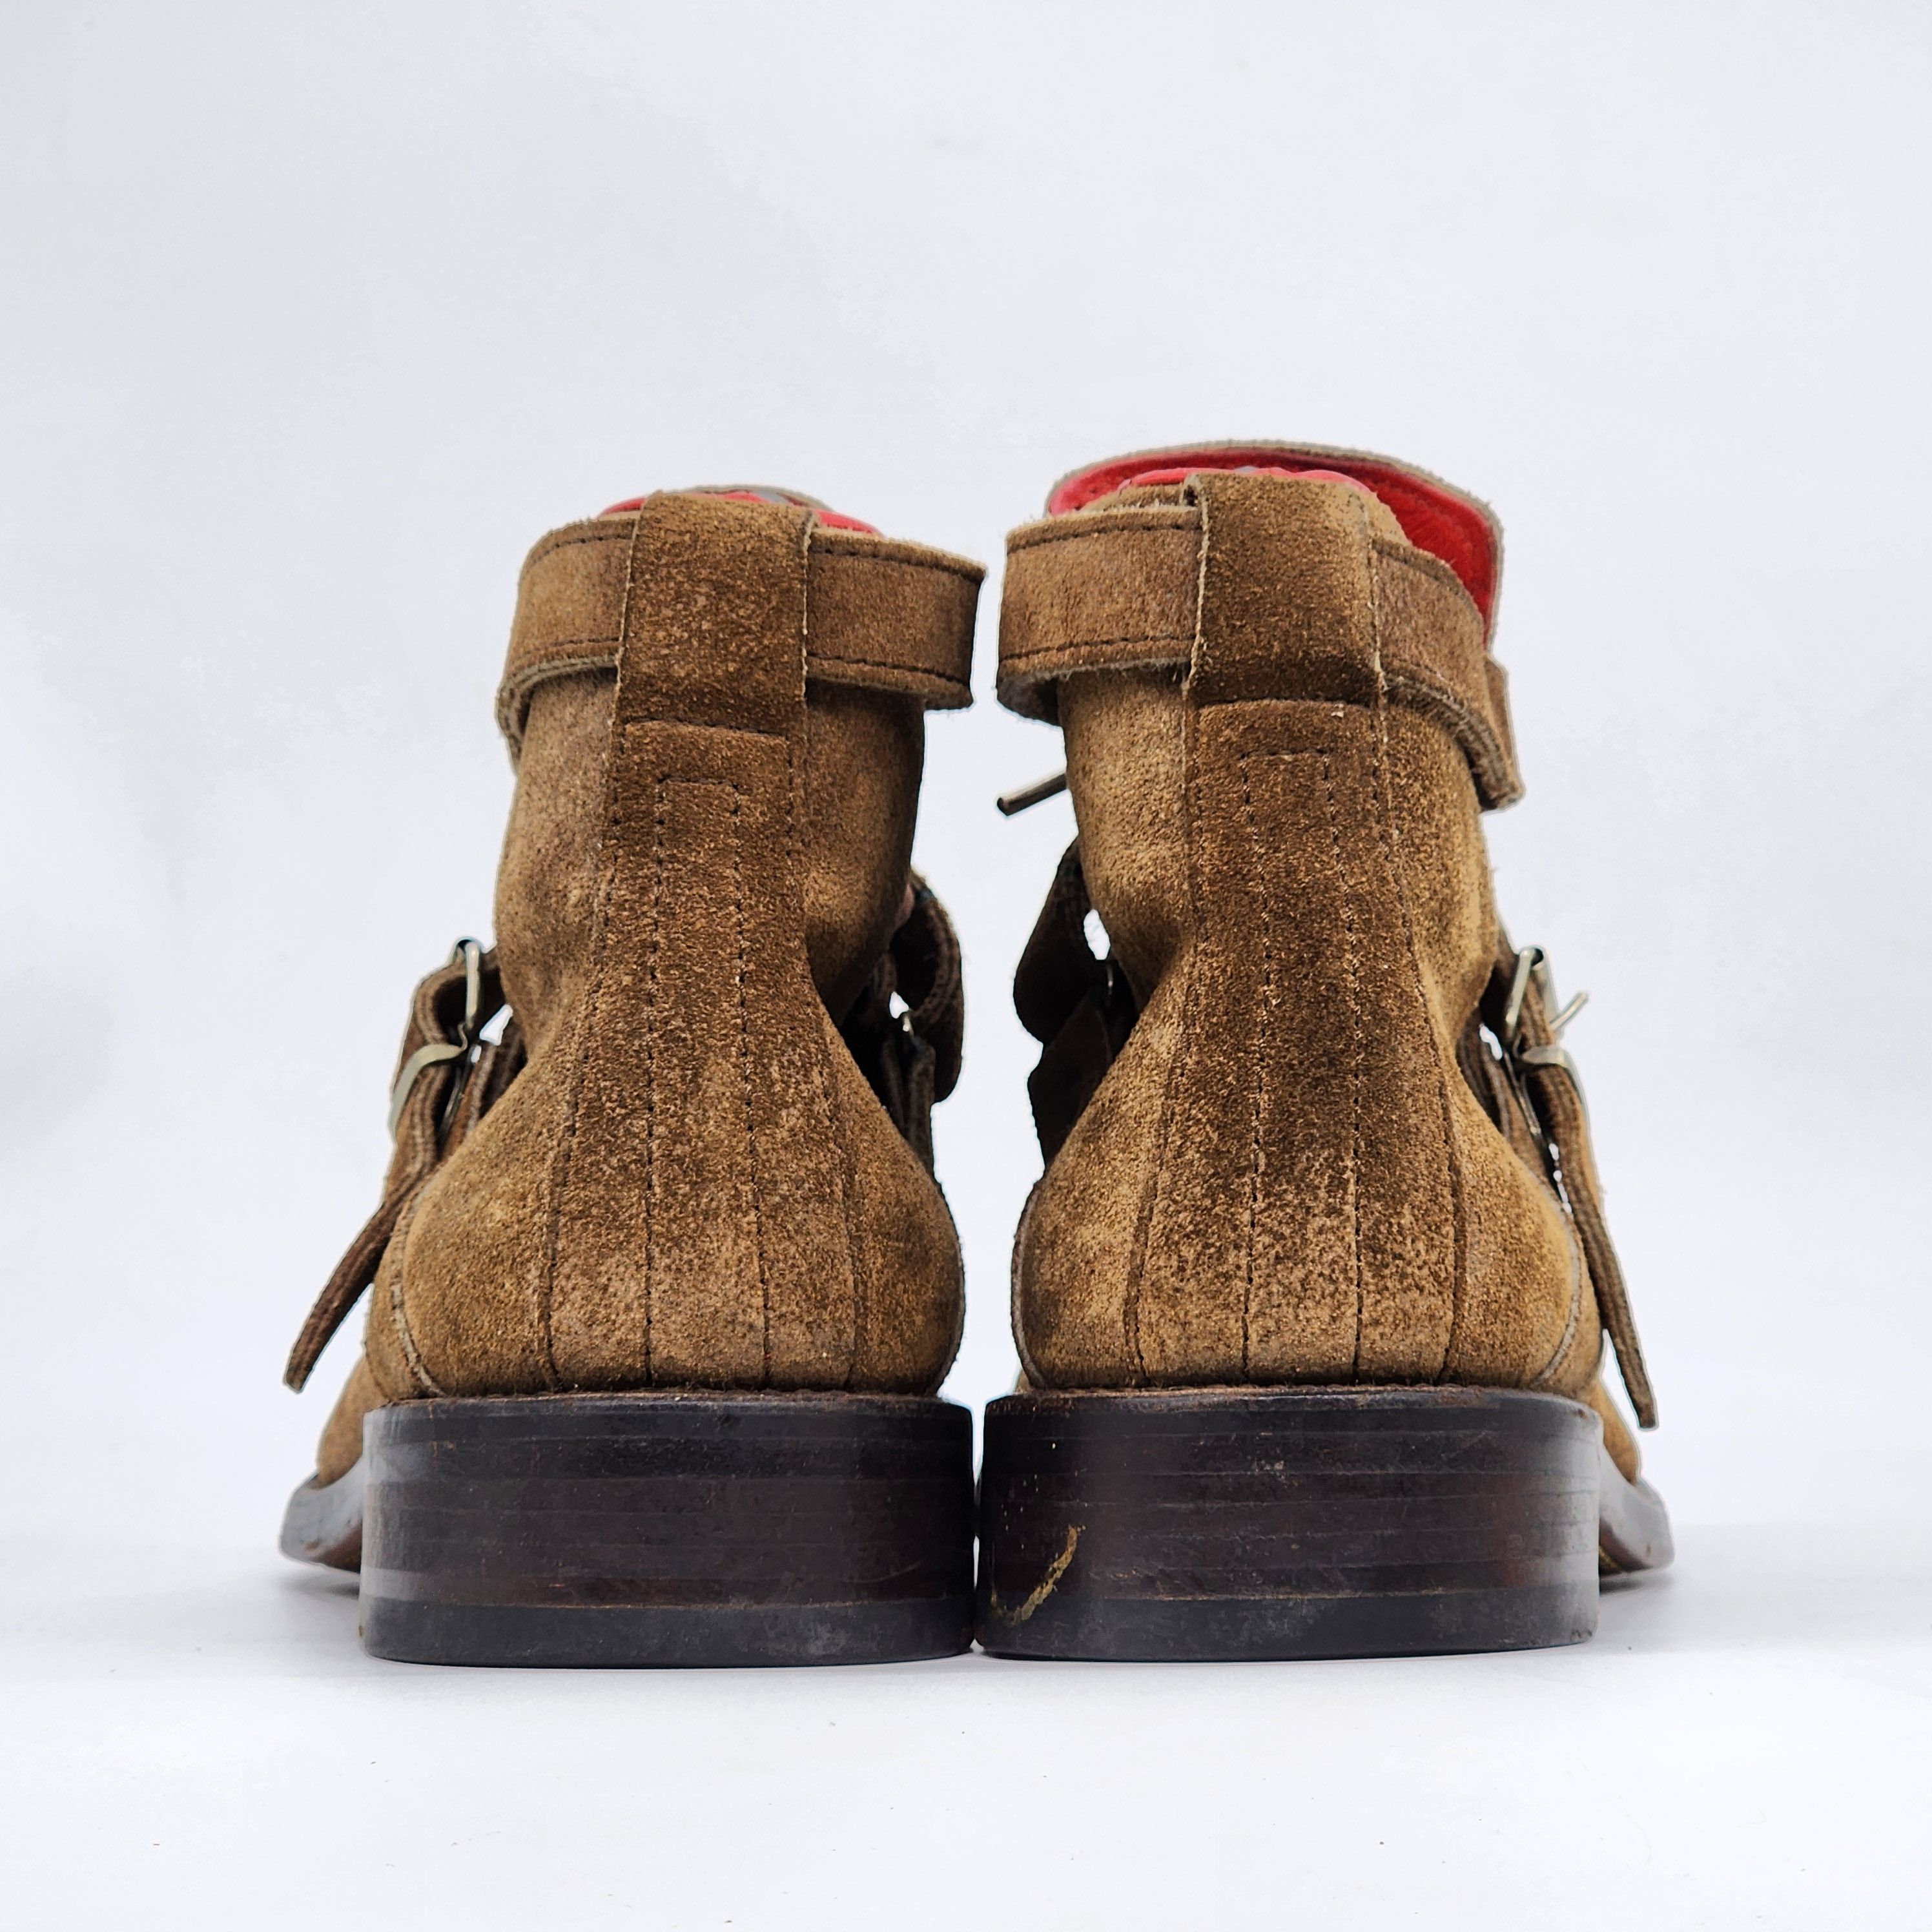 Archival Clothing - Jean Baptiste Rautureau - Archival Strap Hiking Boot - 7